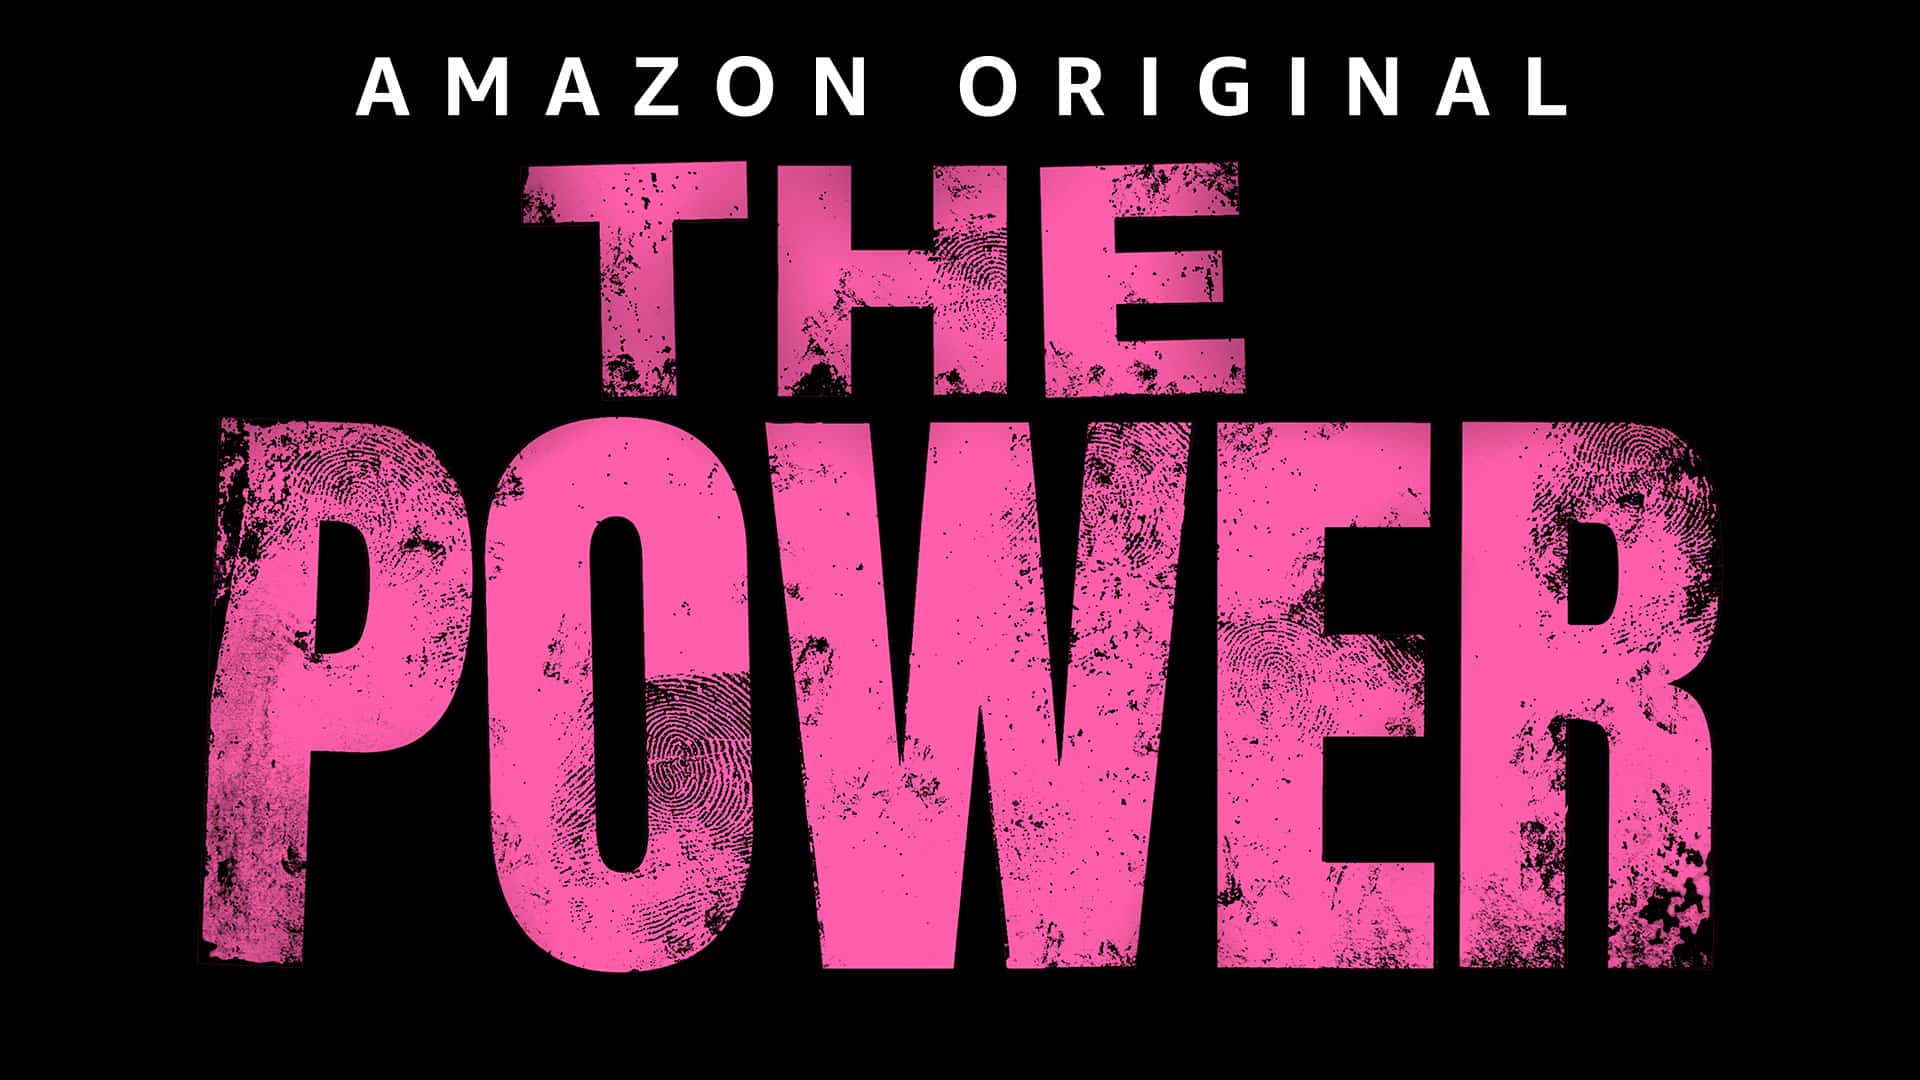 How to Watch The Power Episodes? Streaming Guide